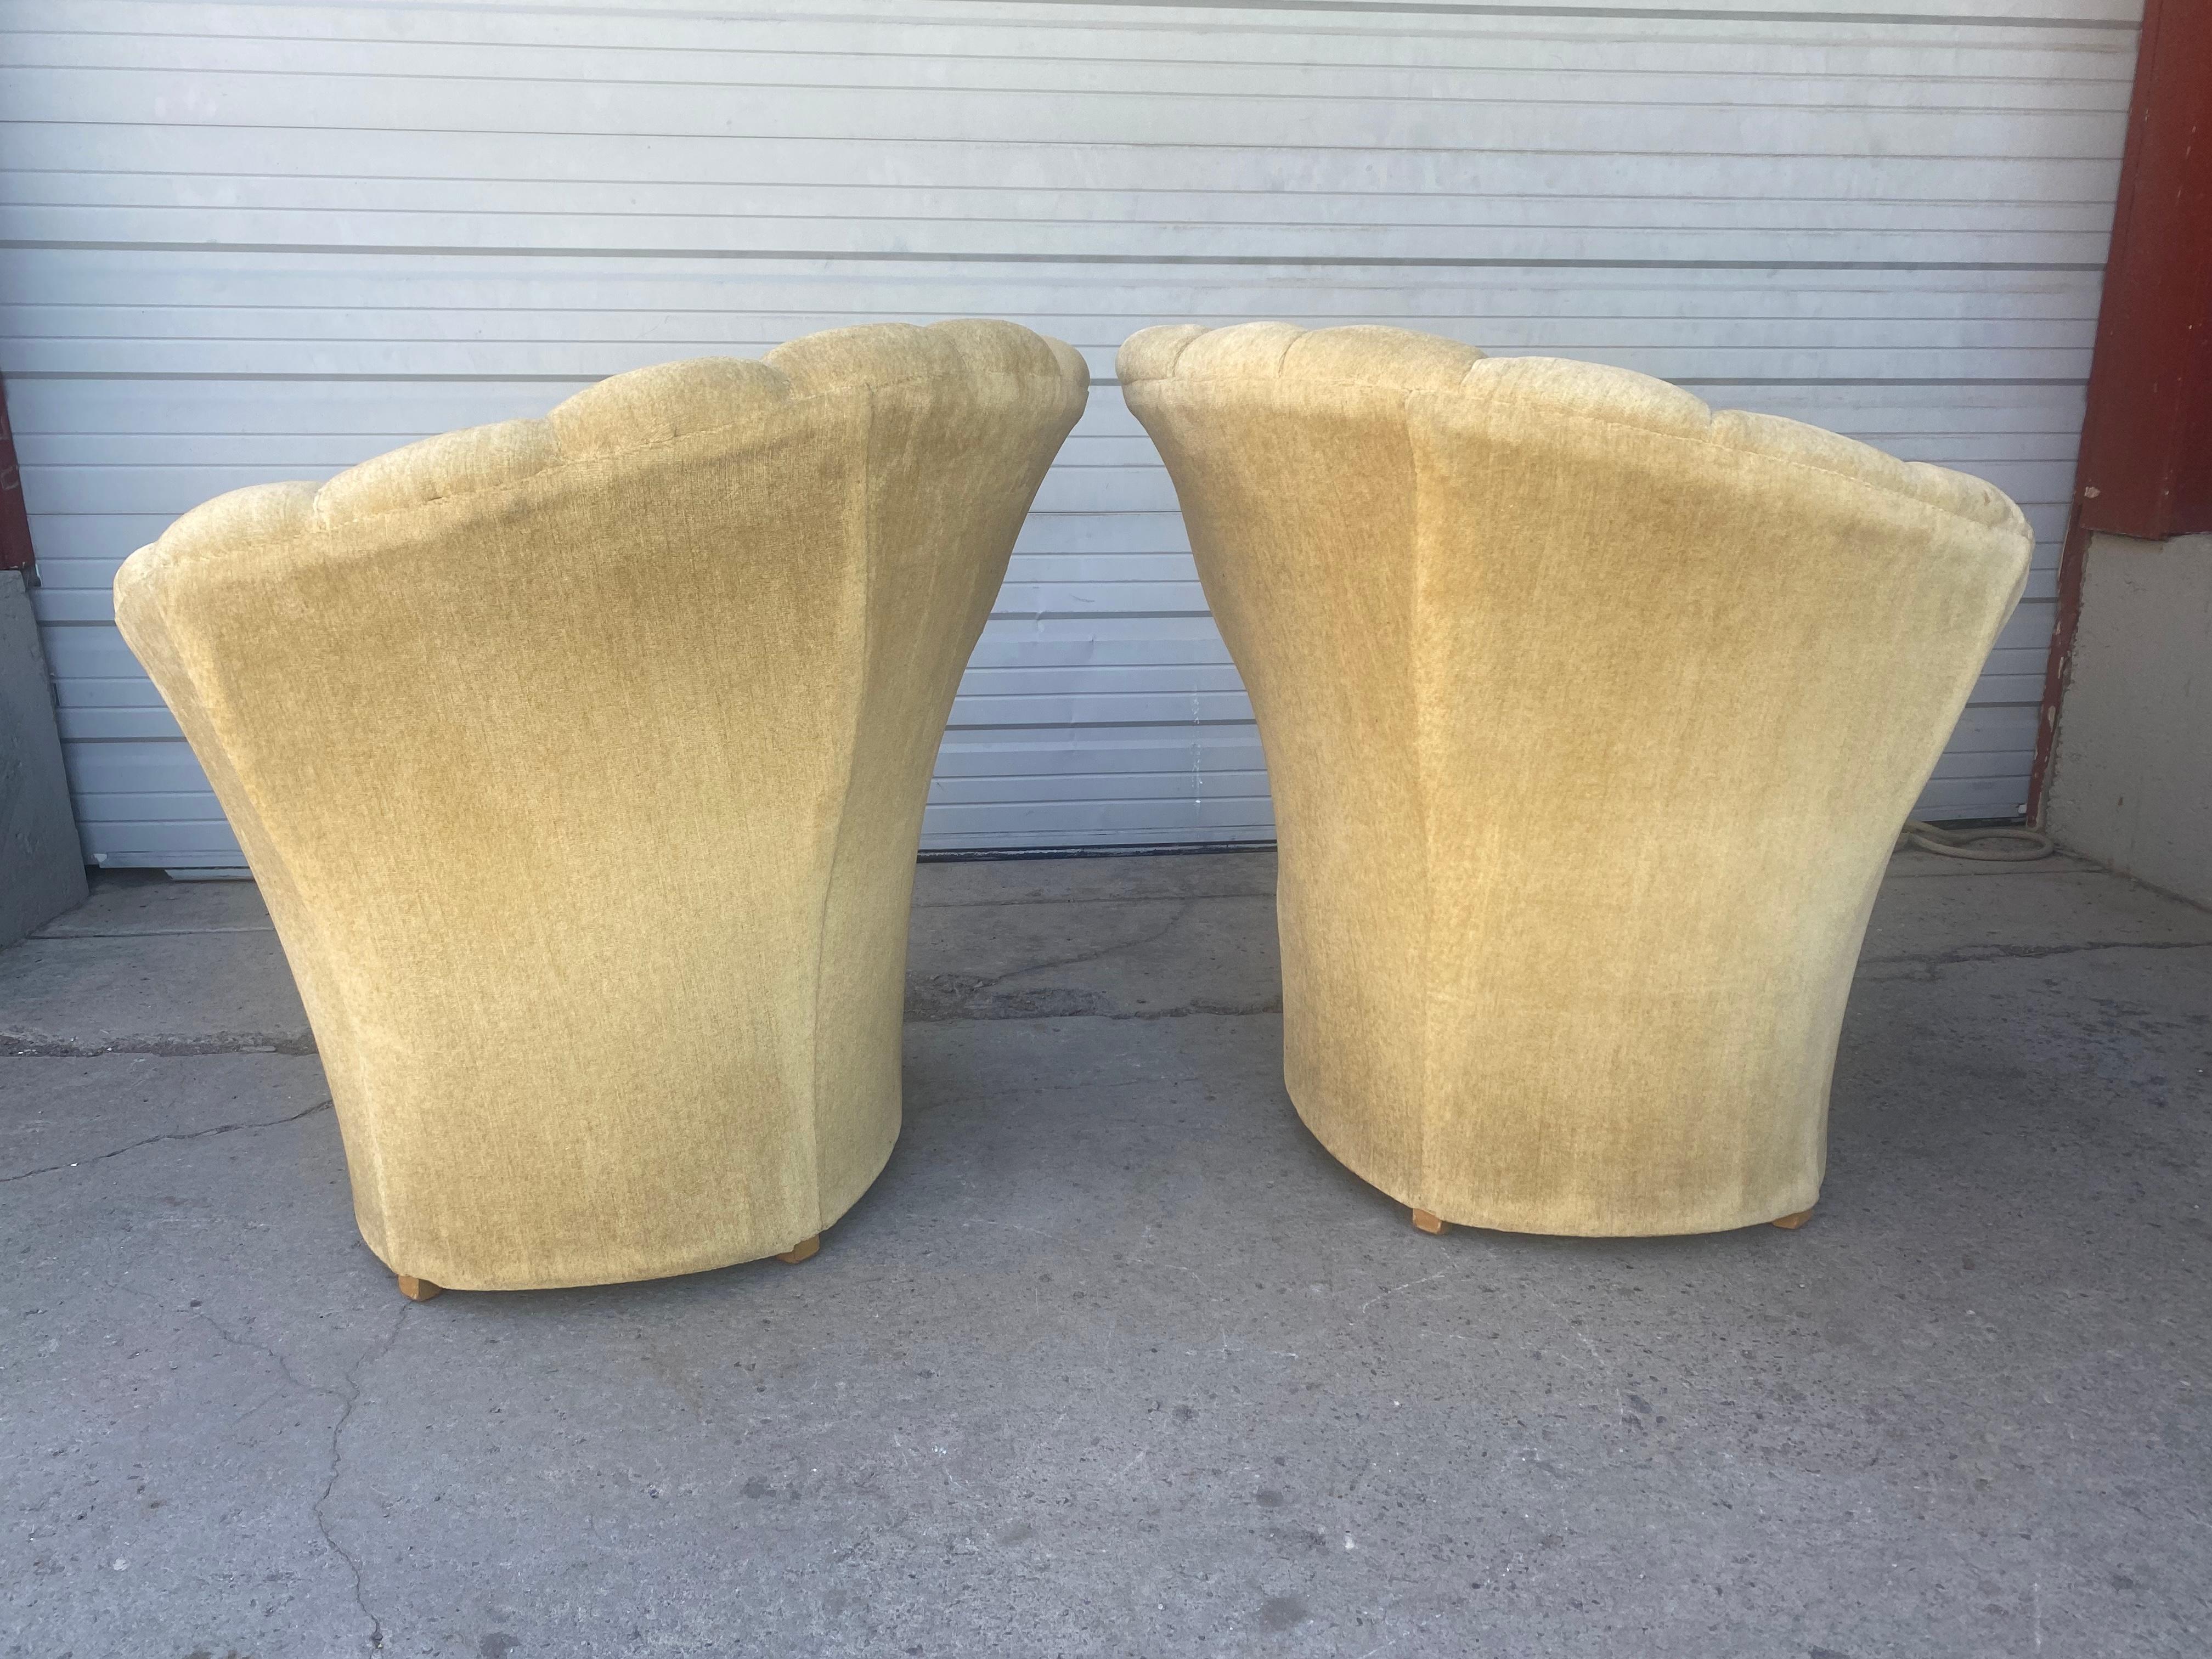 Stunning pair Art deco / regency asymmetrical lounge chairs by Grosfeld House. Amazing design, hollywood glam. Retain original cream color mohair upholstery. Extremely comfortable. Hand delivery avail to New York City or anywhere en route from